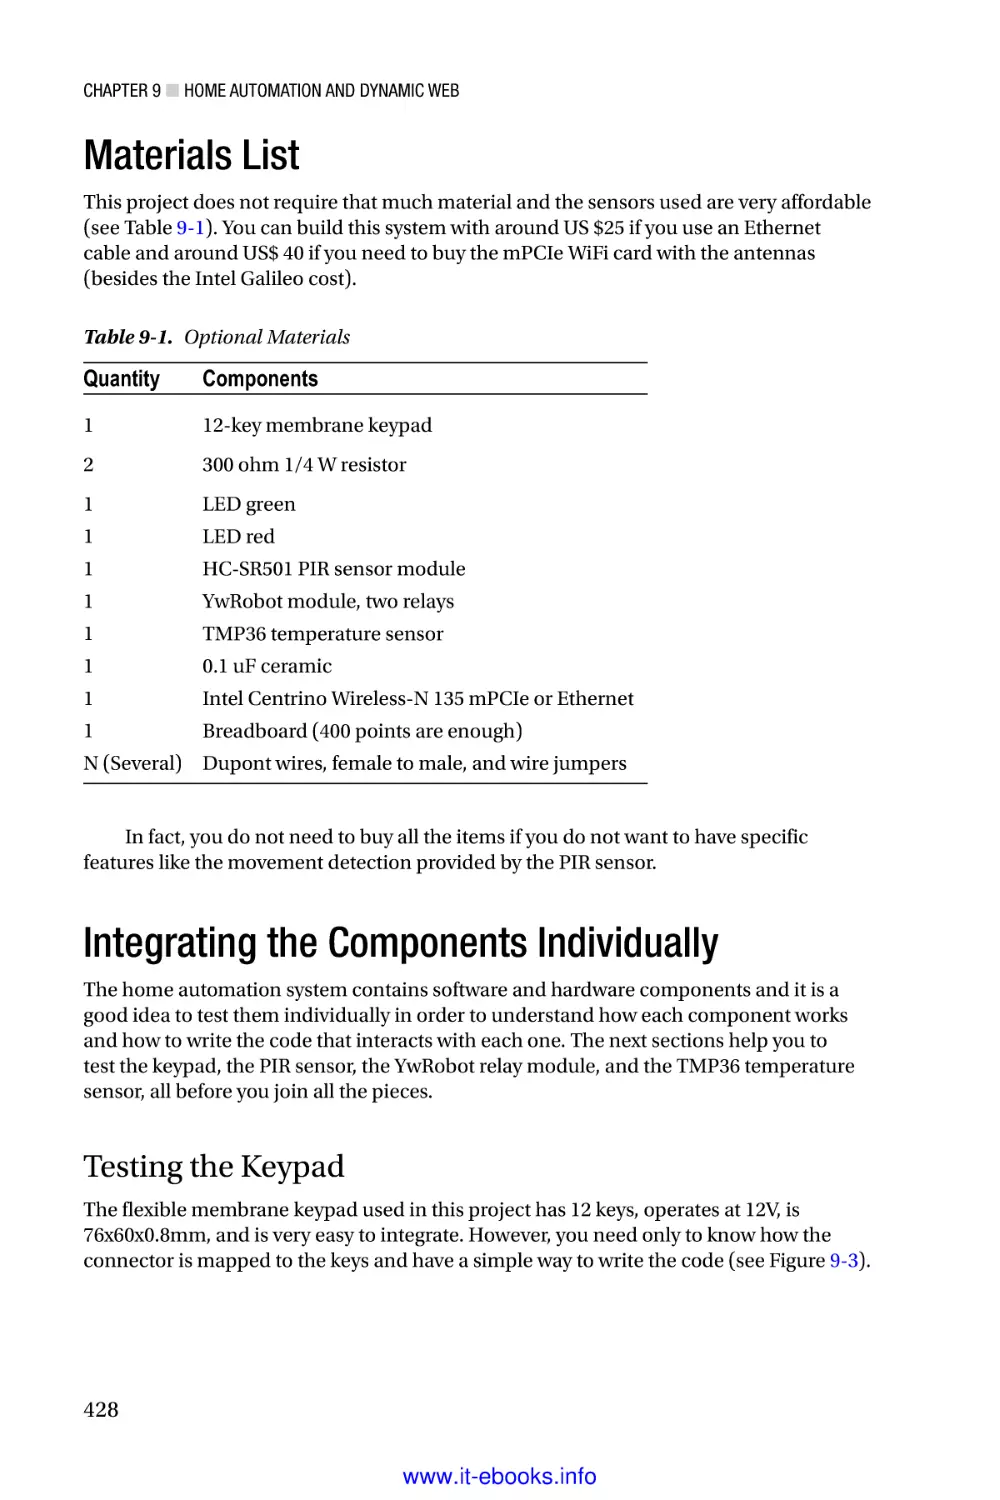 Materials List
Integrating the Components Individually
Testing the Keypad